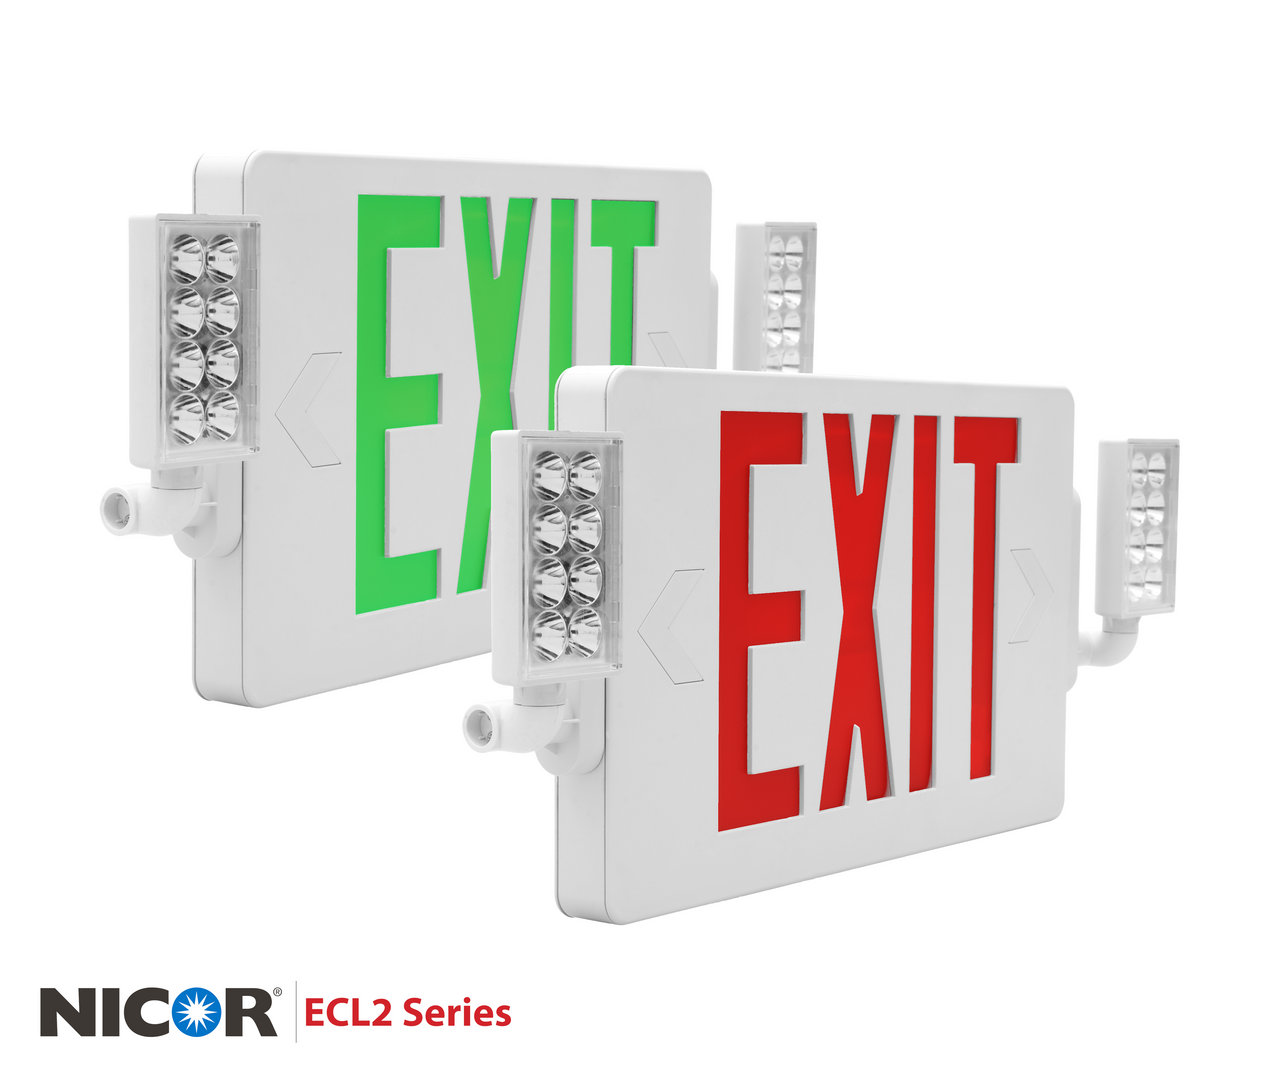 NICOR ECL21UNVWHG2 ECL2 Series Slim LED Emergency Exit Sign Combo, Green Lettering